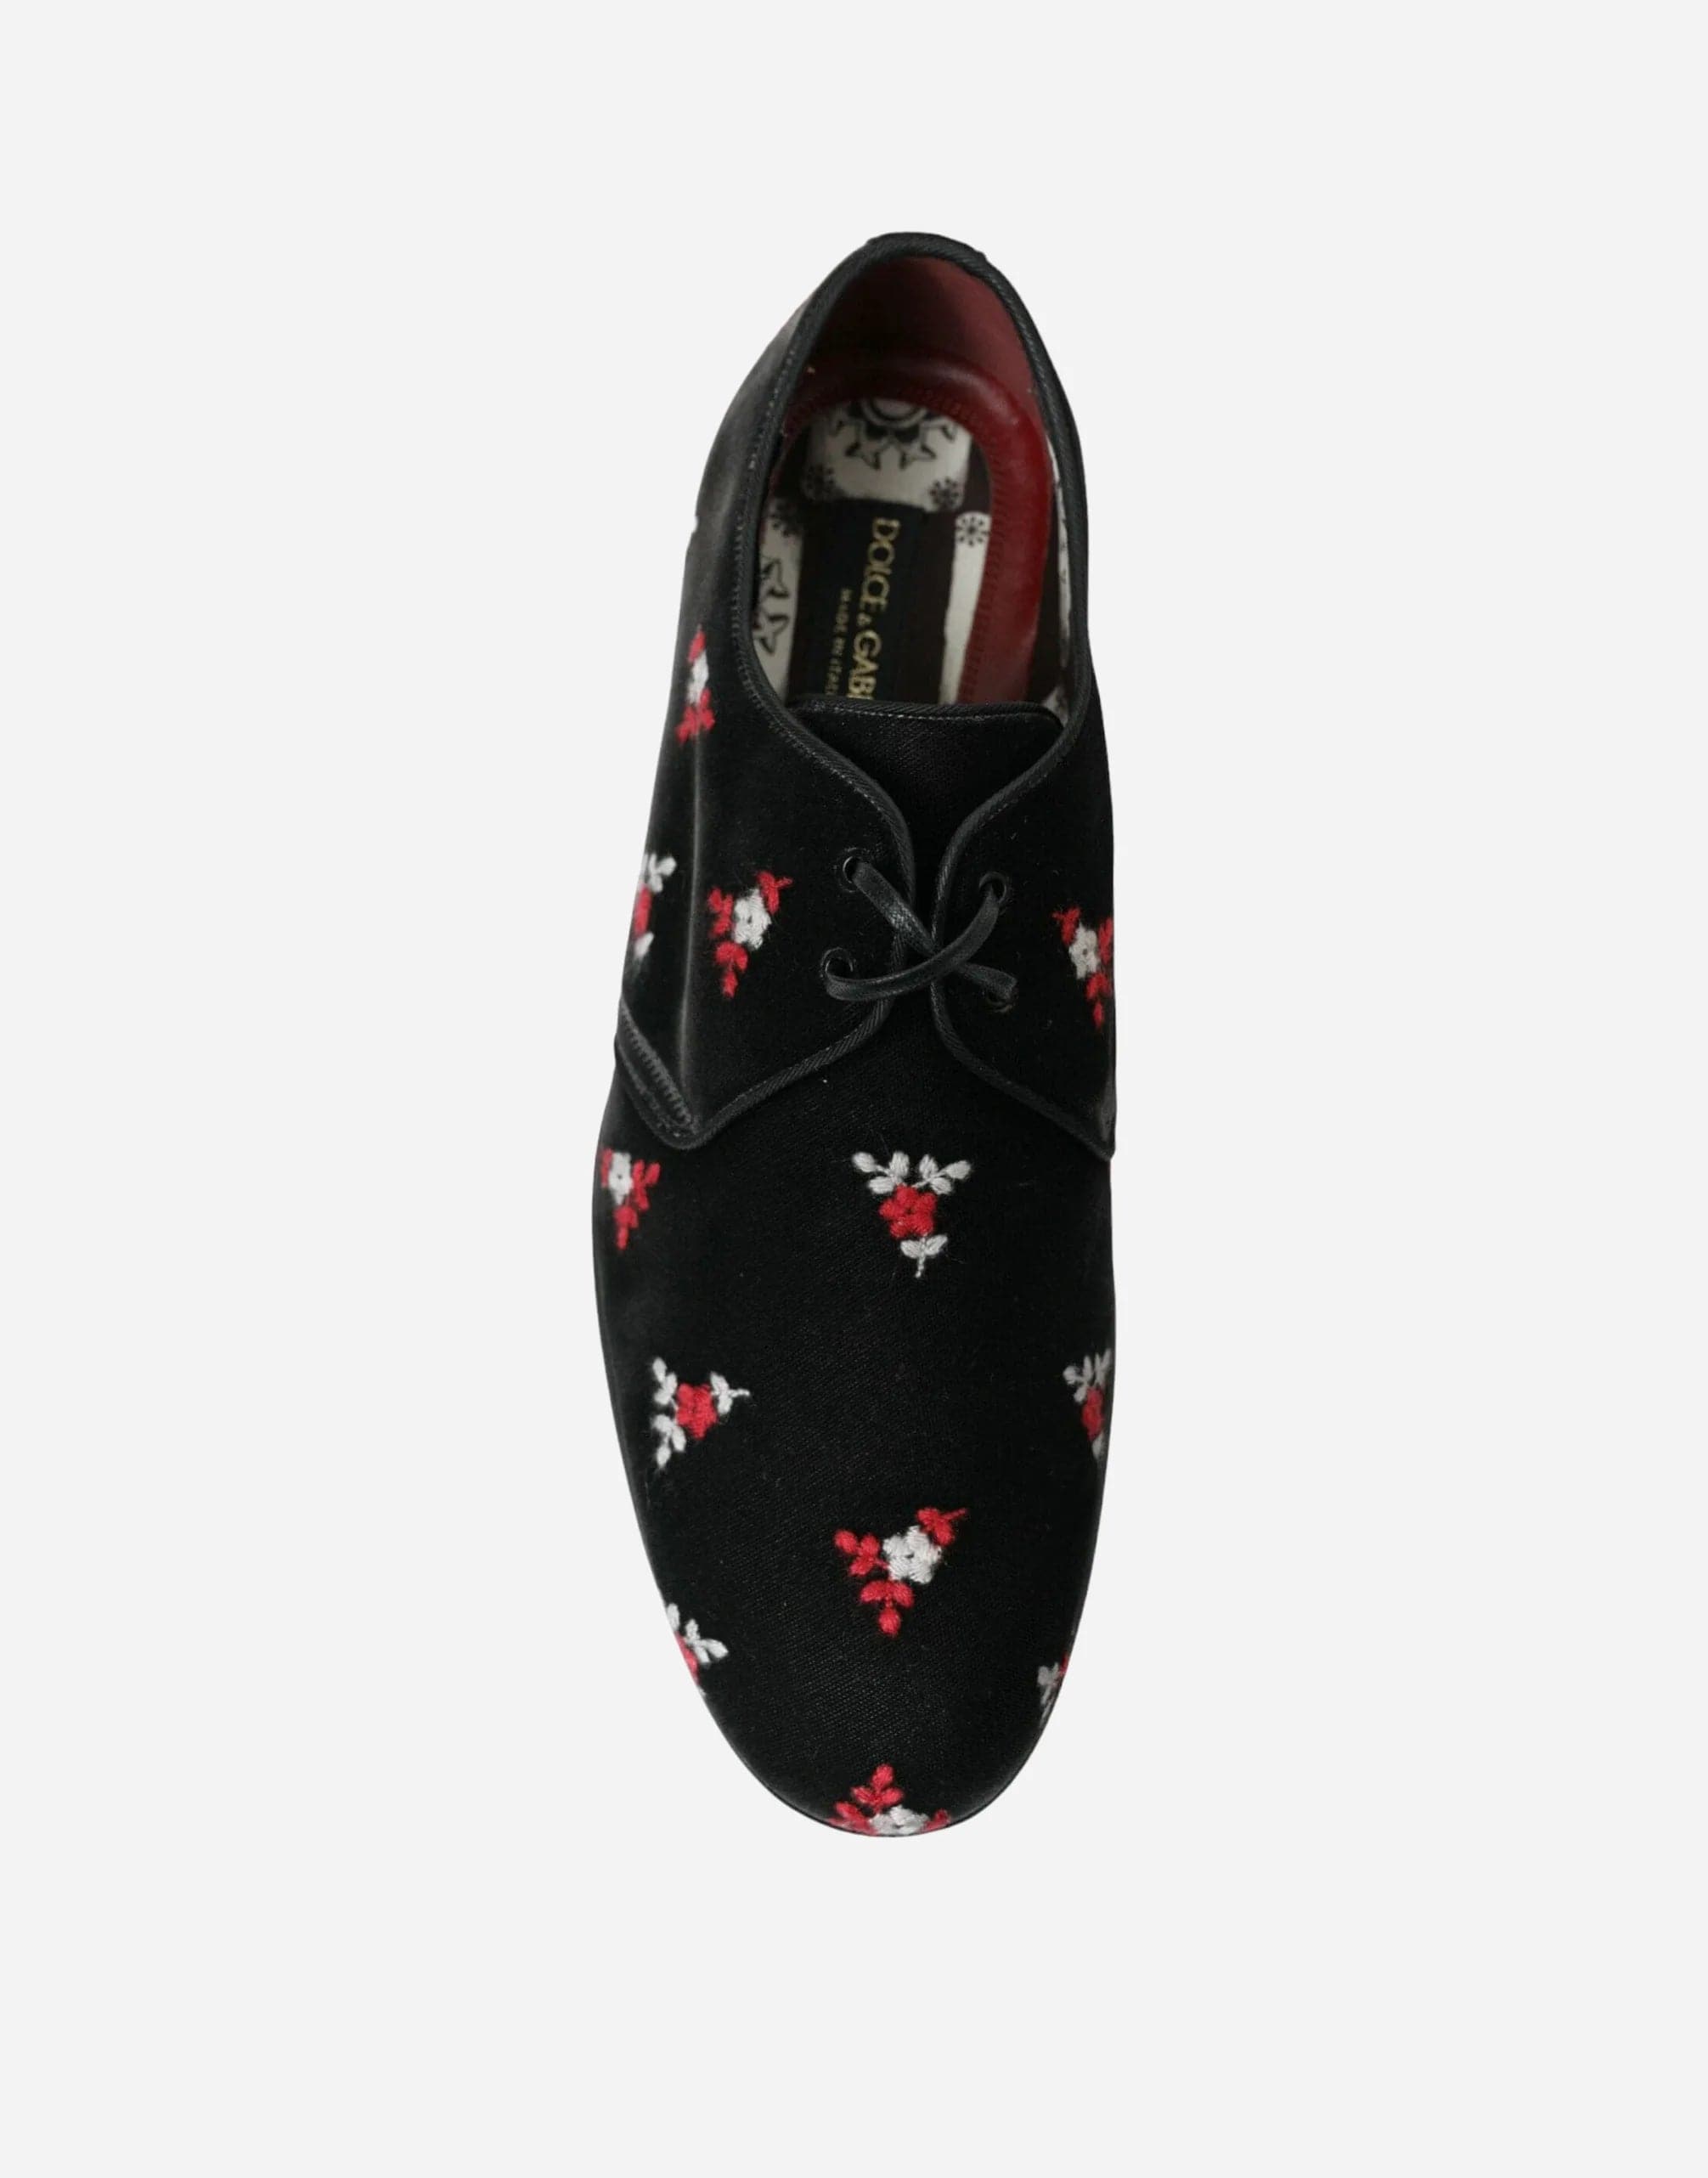 Floral Embroidery Dress Shoes